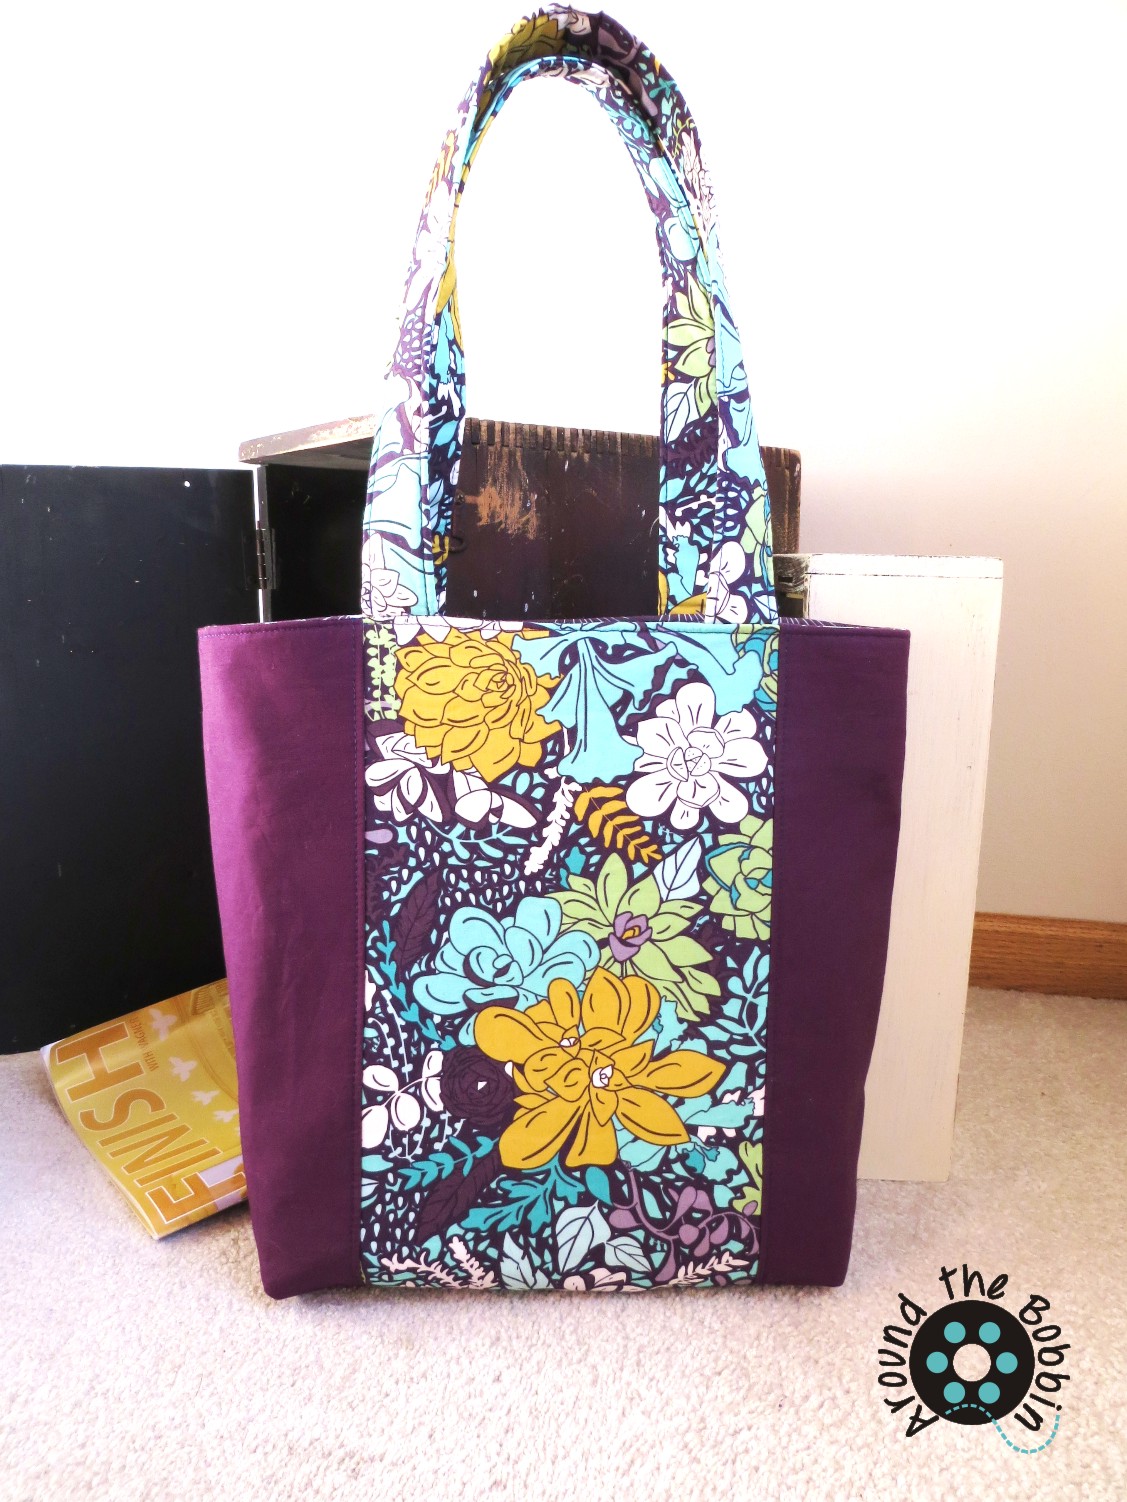 21 Totes Project Continues – Tote 15!